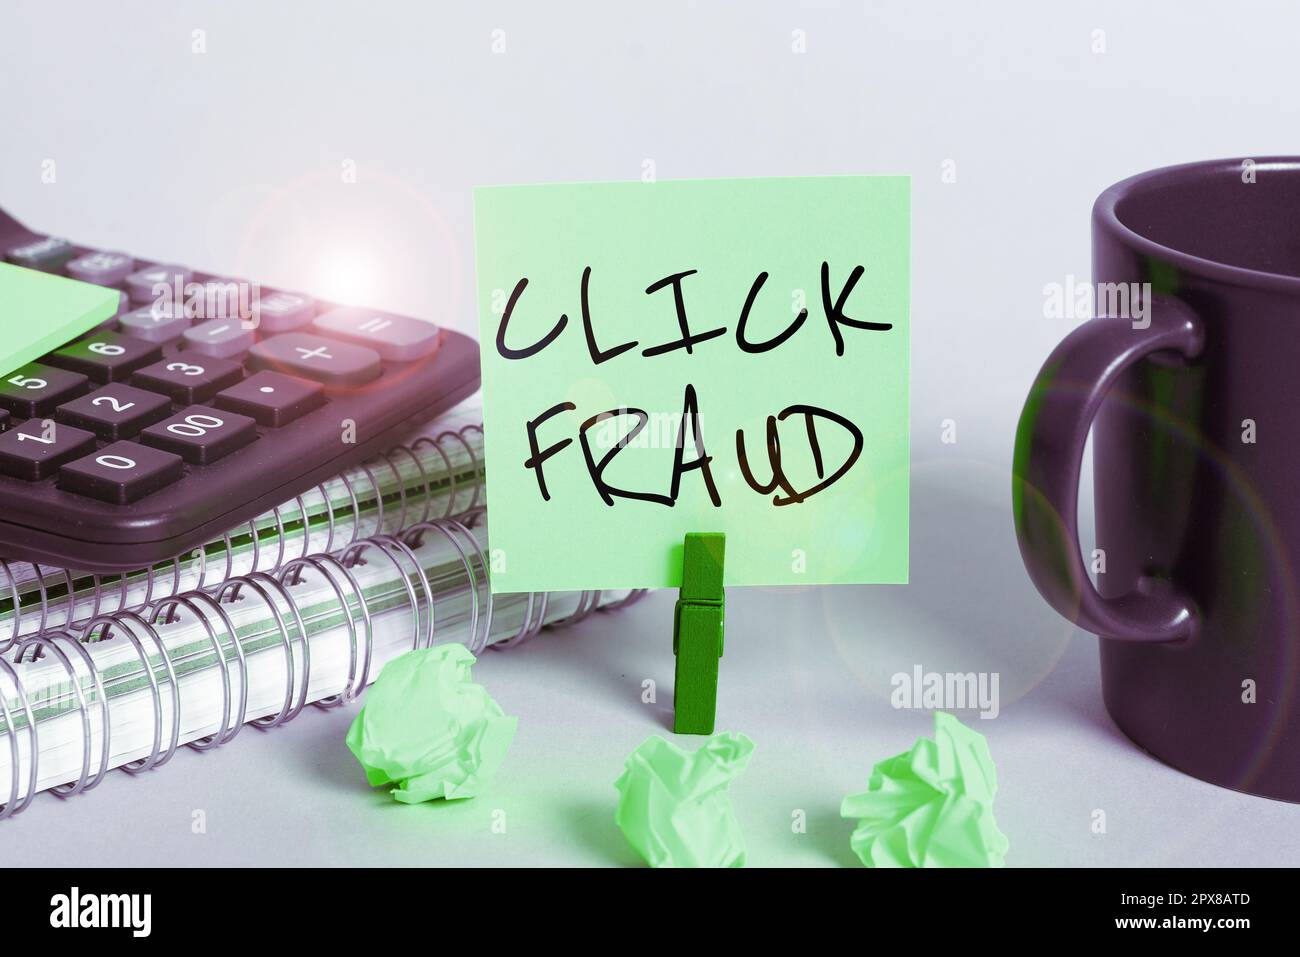 Sign displaying Click Fraud, Business overview practice of repeatedly clicking on advertisement hosted website Stock Photo